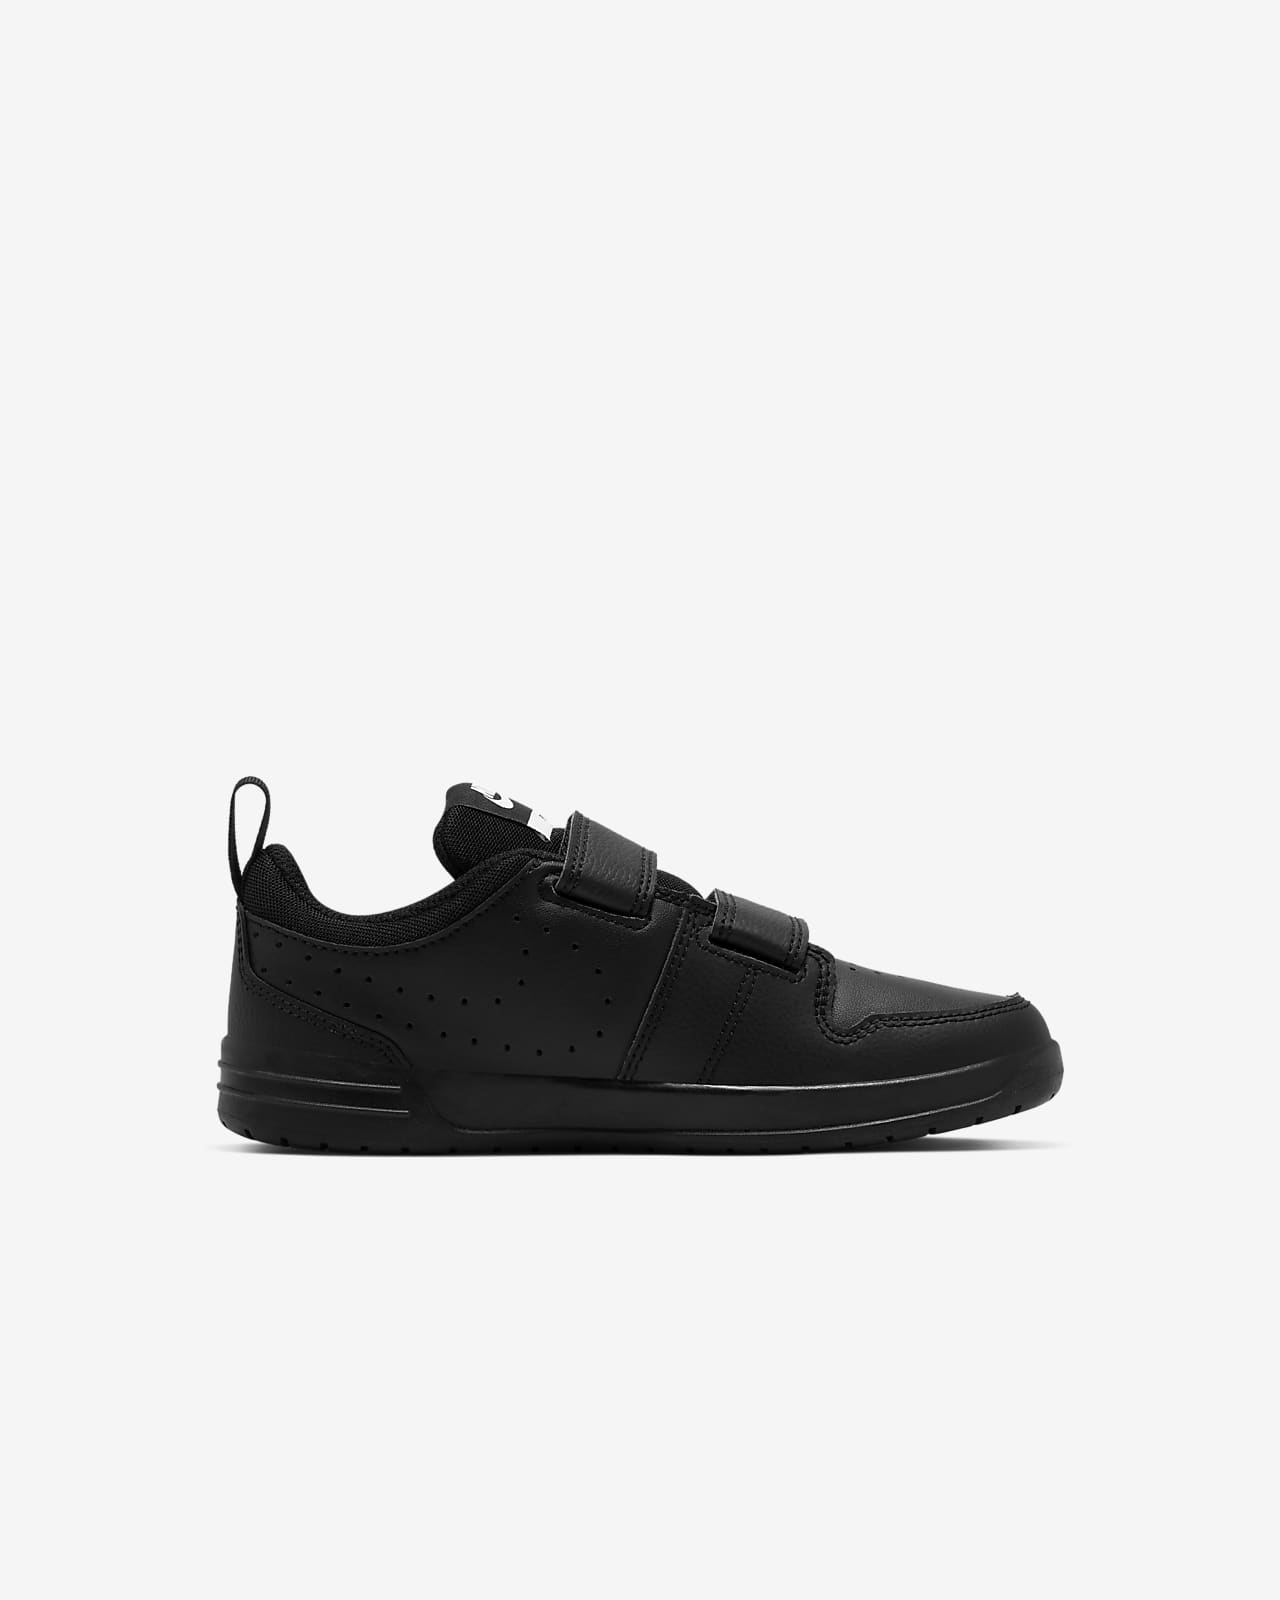 nike pico 5 youth trainers